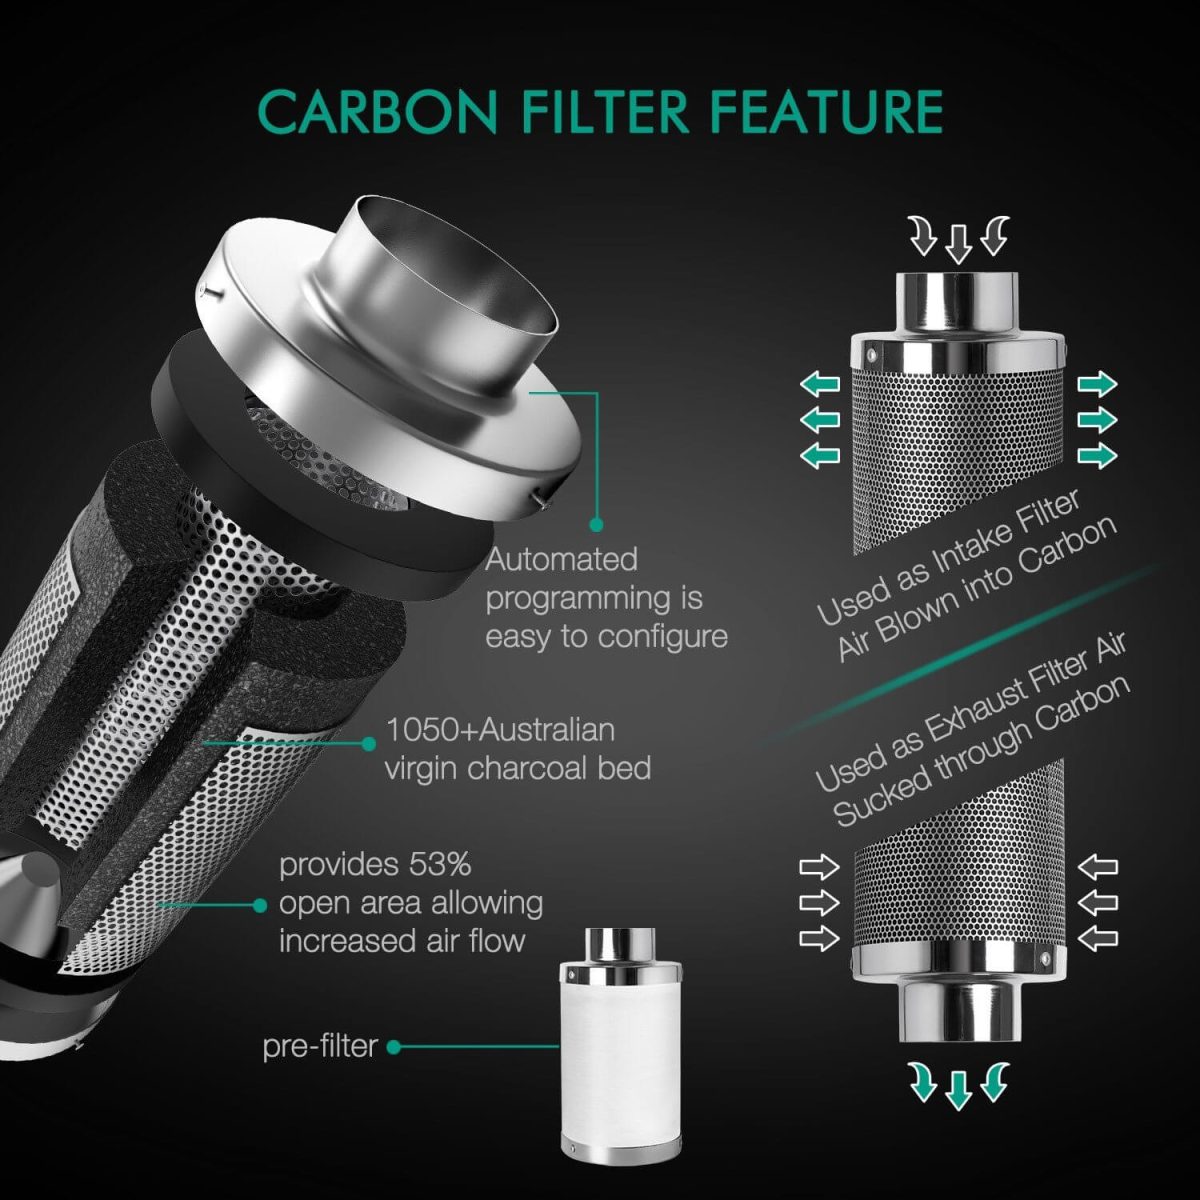 Features of carbon filter, can absorb exponentially more contaminants